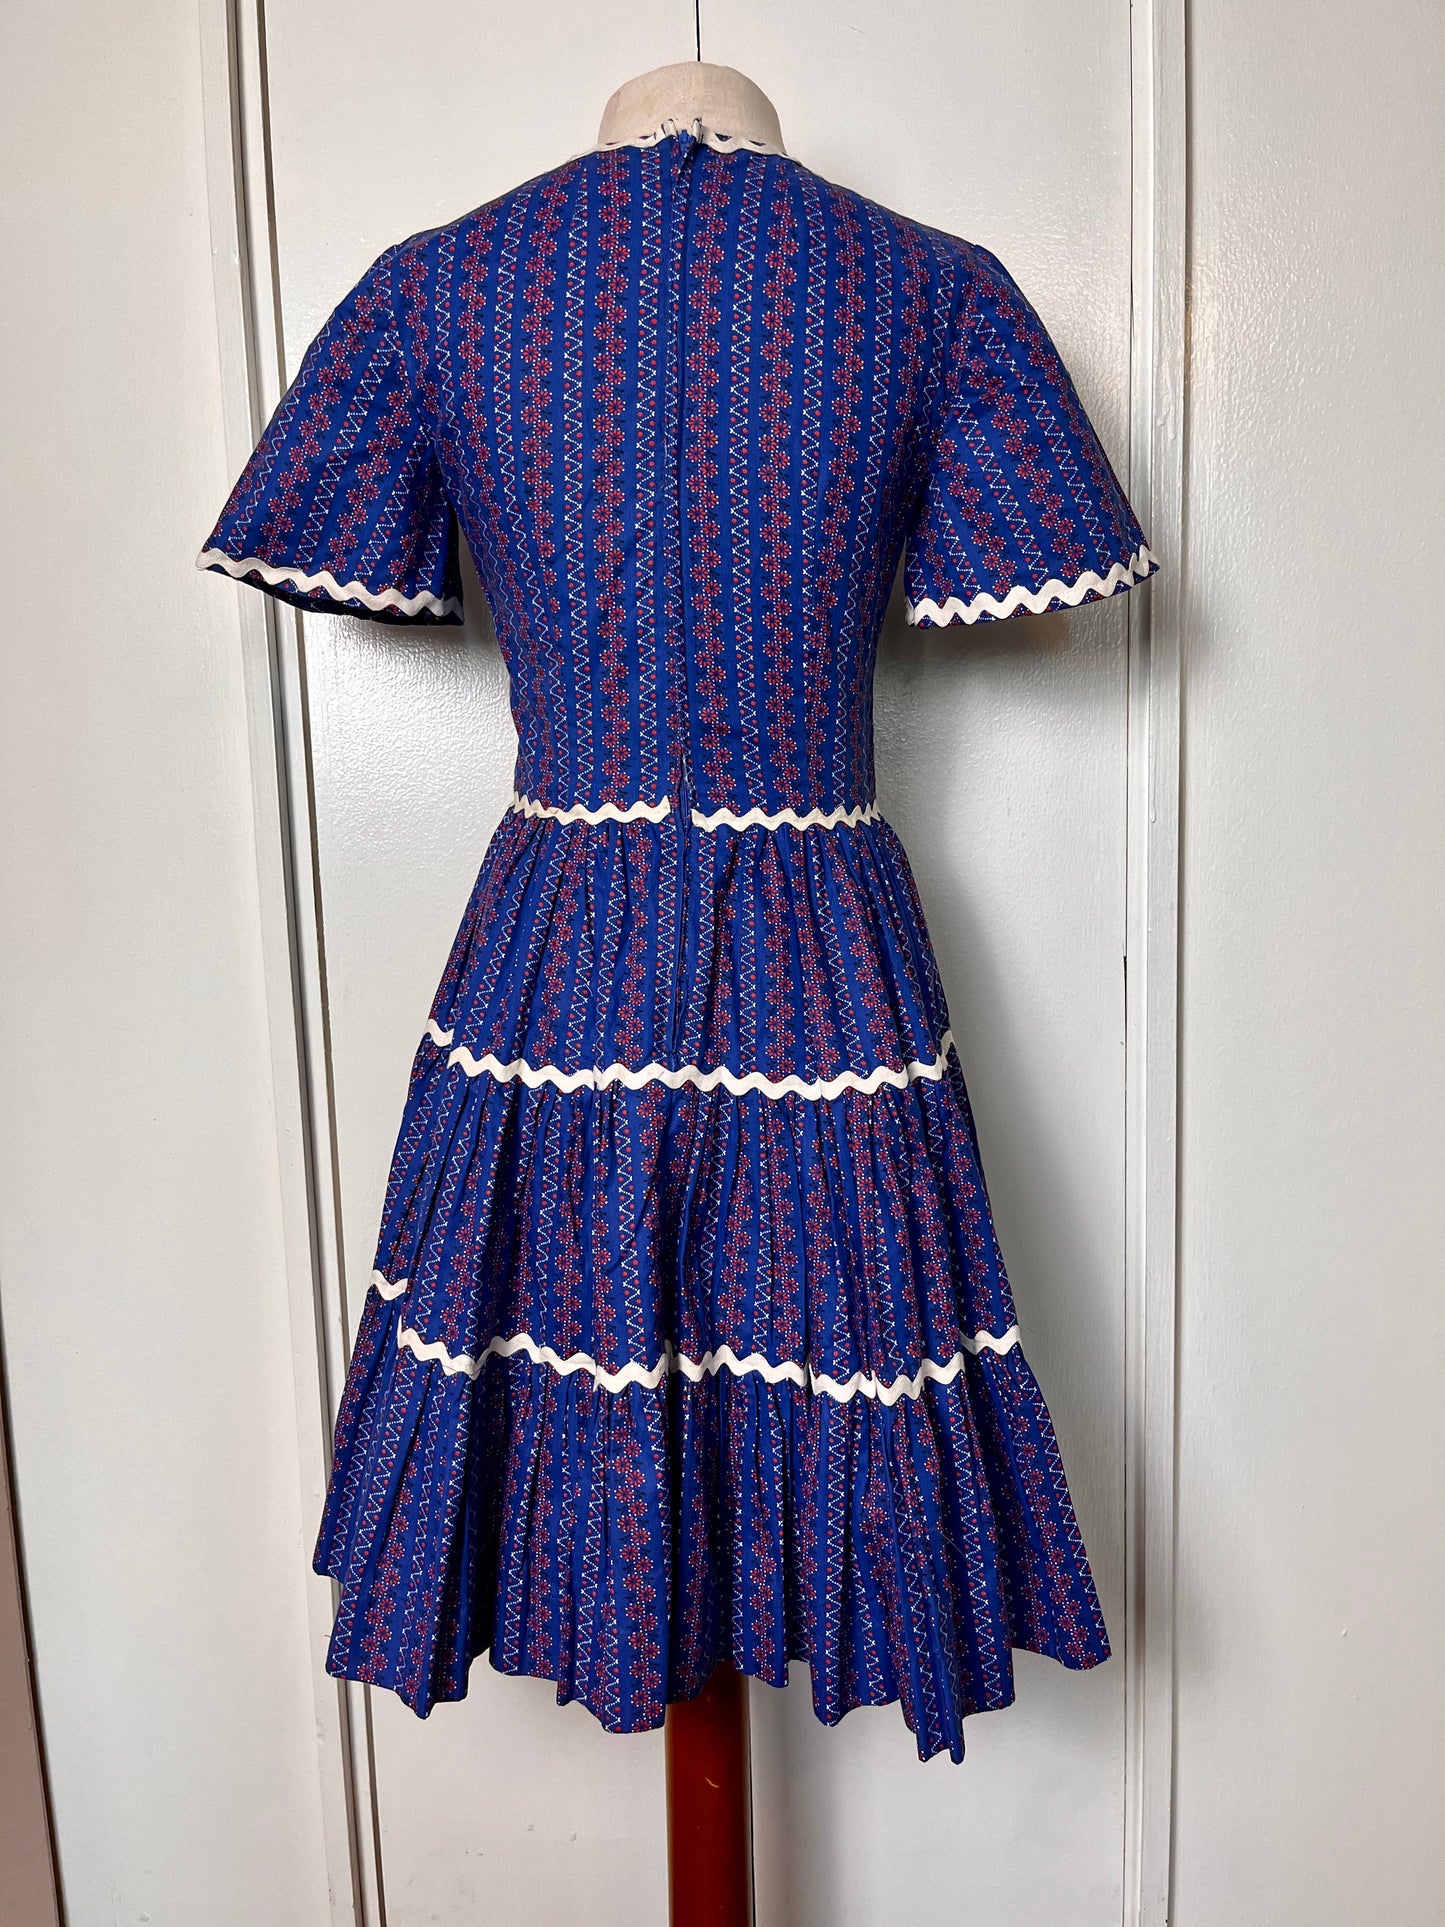 Vintage 1980's "Home-sewn" Square Dancing Dress in Blue & Red Calico